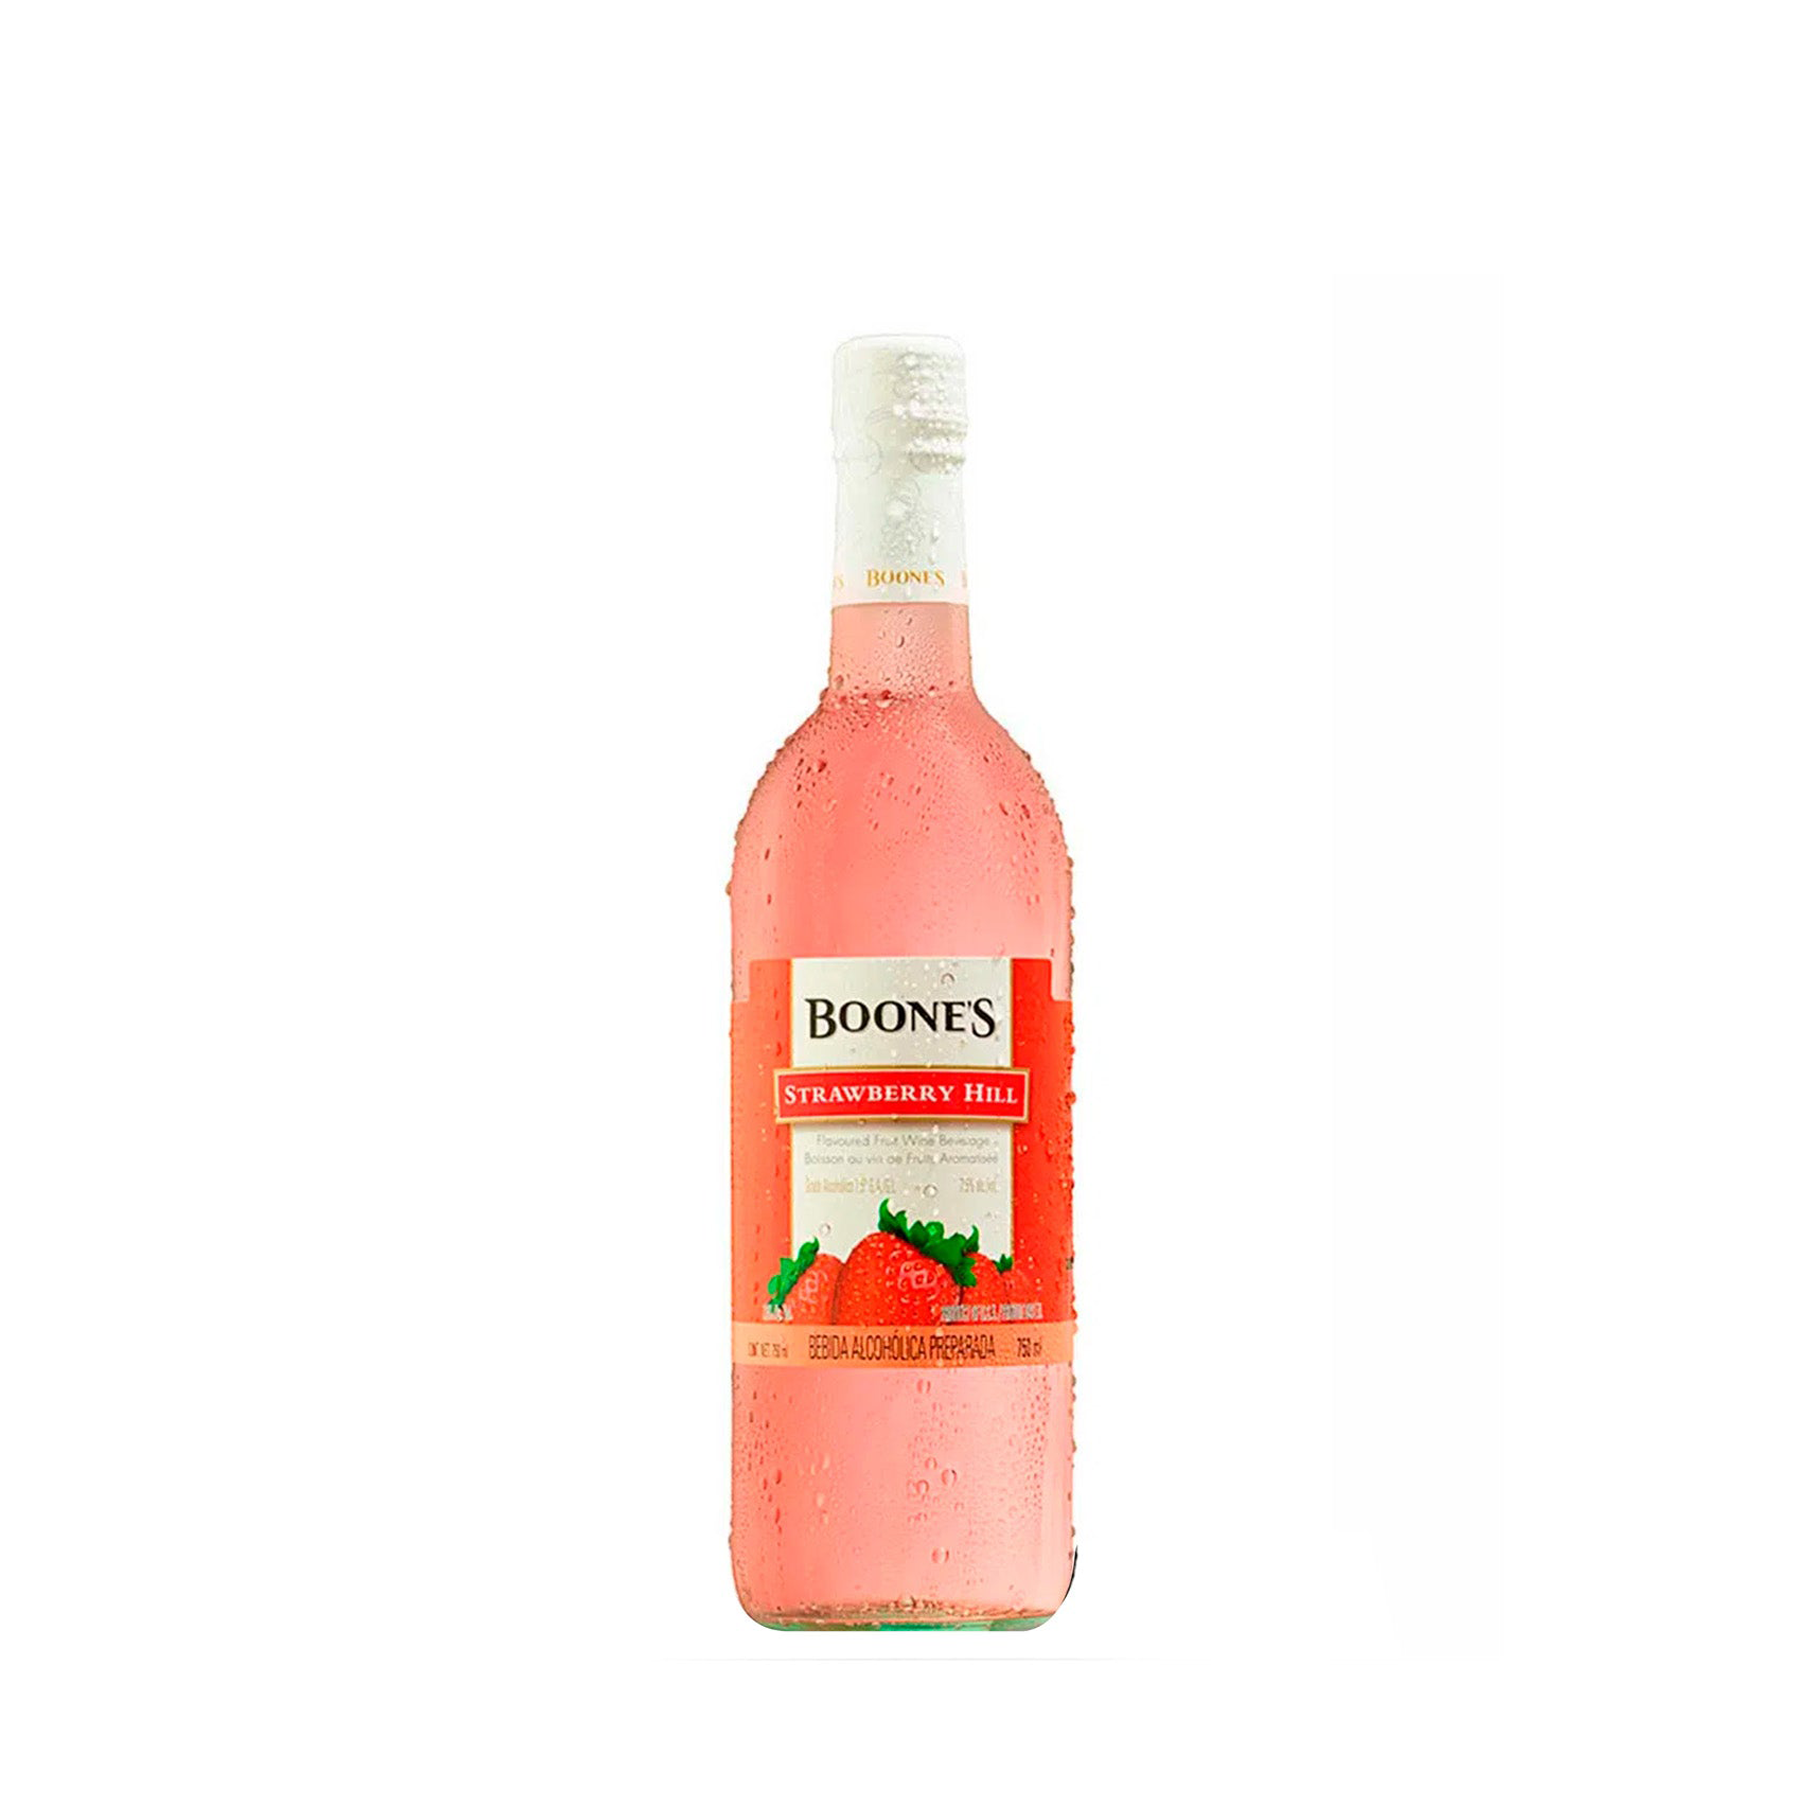 BOONES STRAWBERRY HILL 750 MLT 7.5%